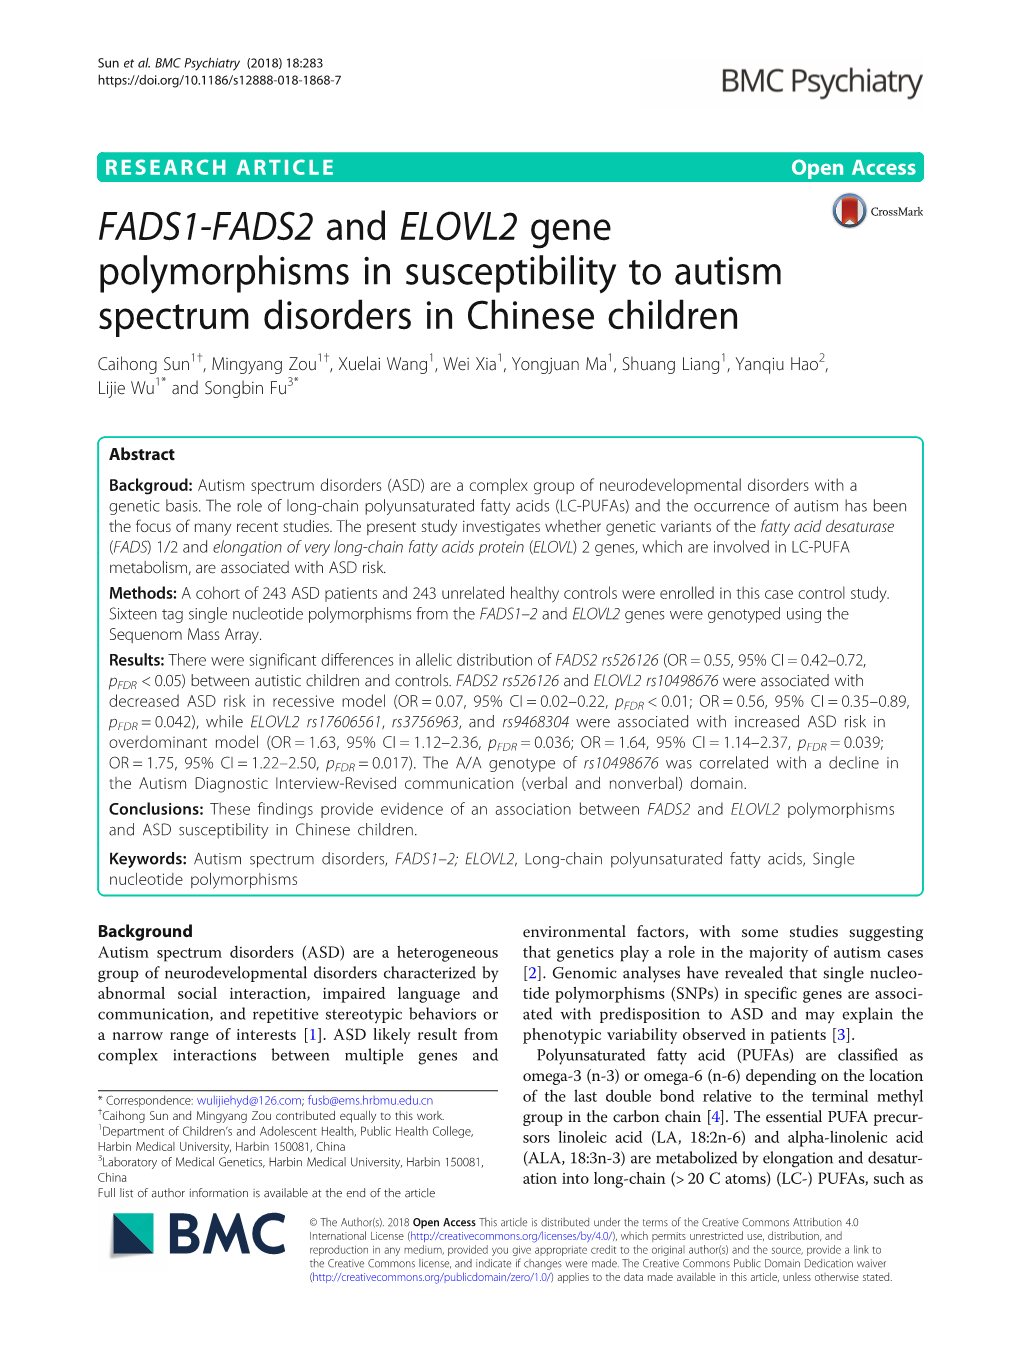 FADS1-FADS2 and ELOVL2 Gene Polymorphisms in Susceptibility To